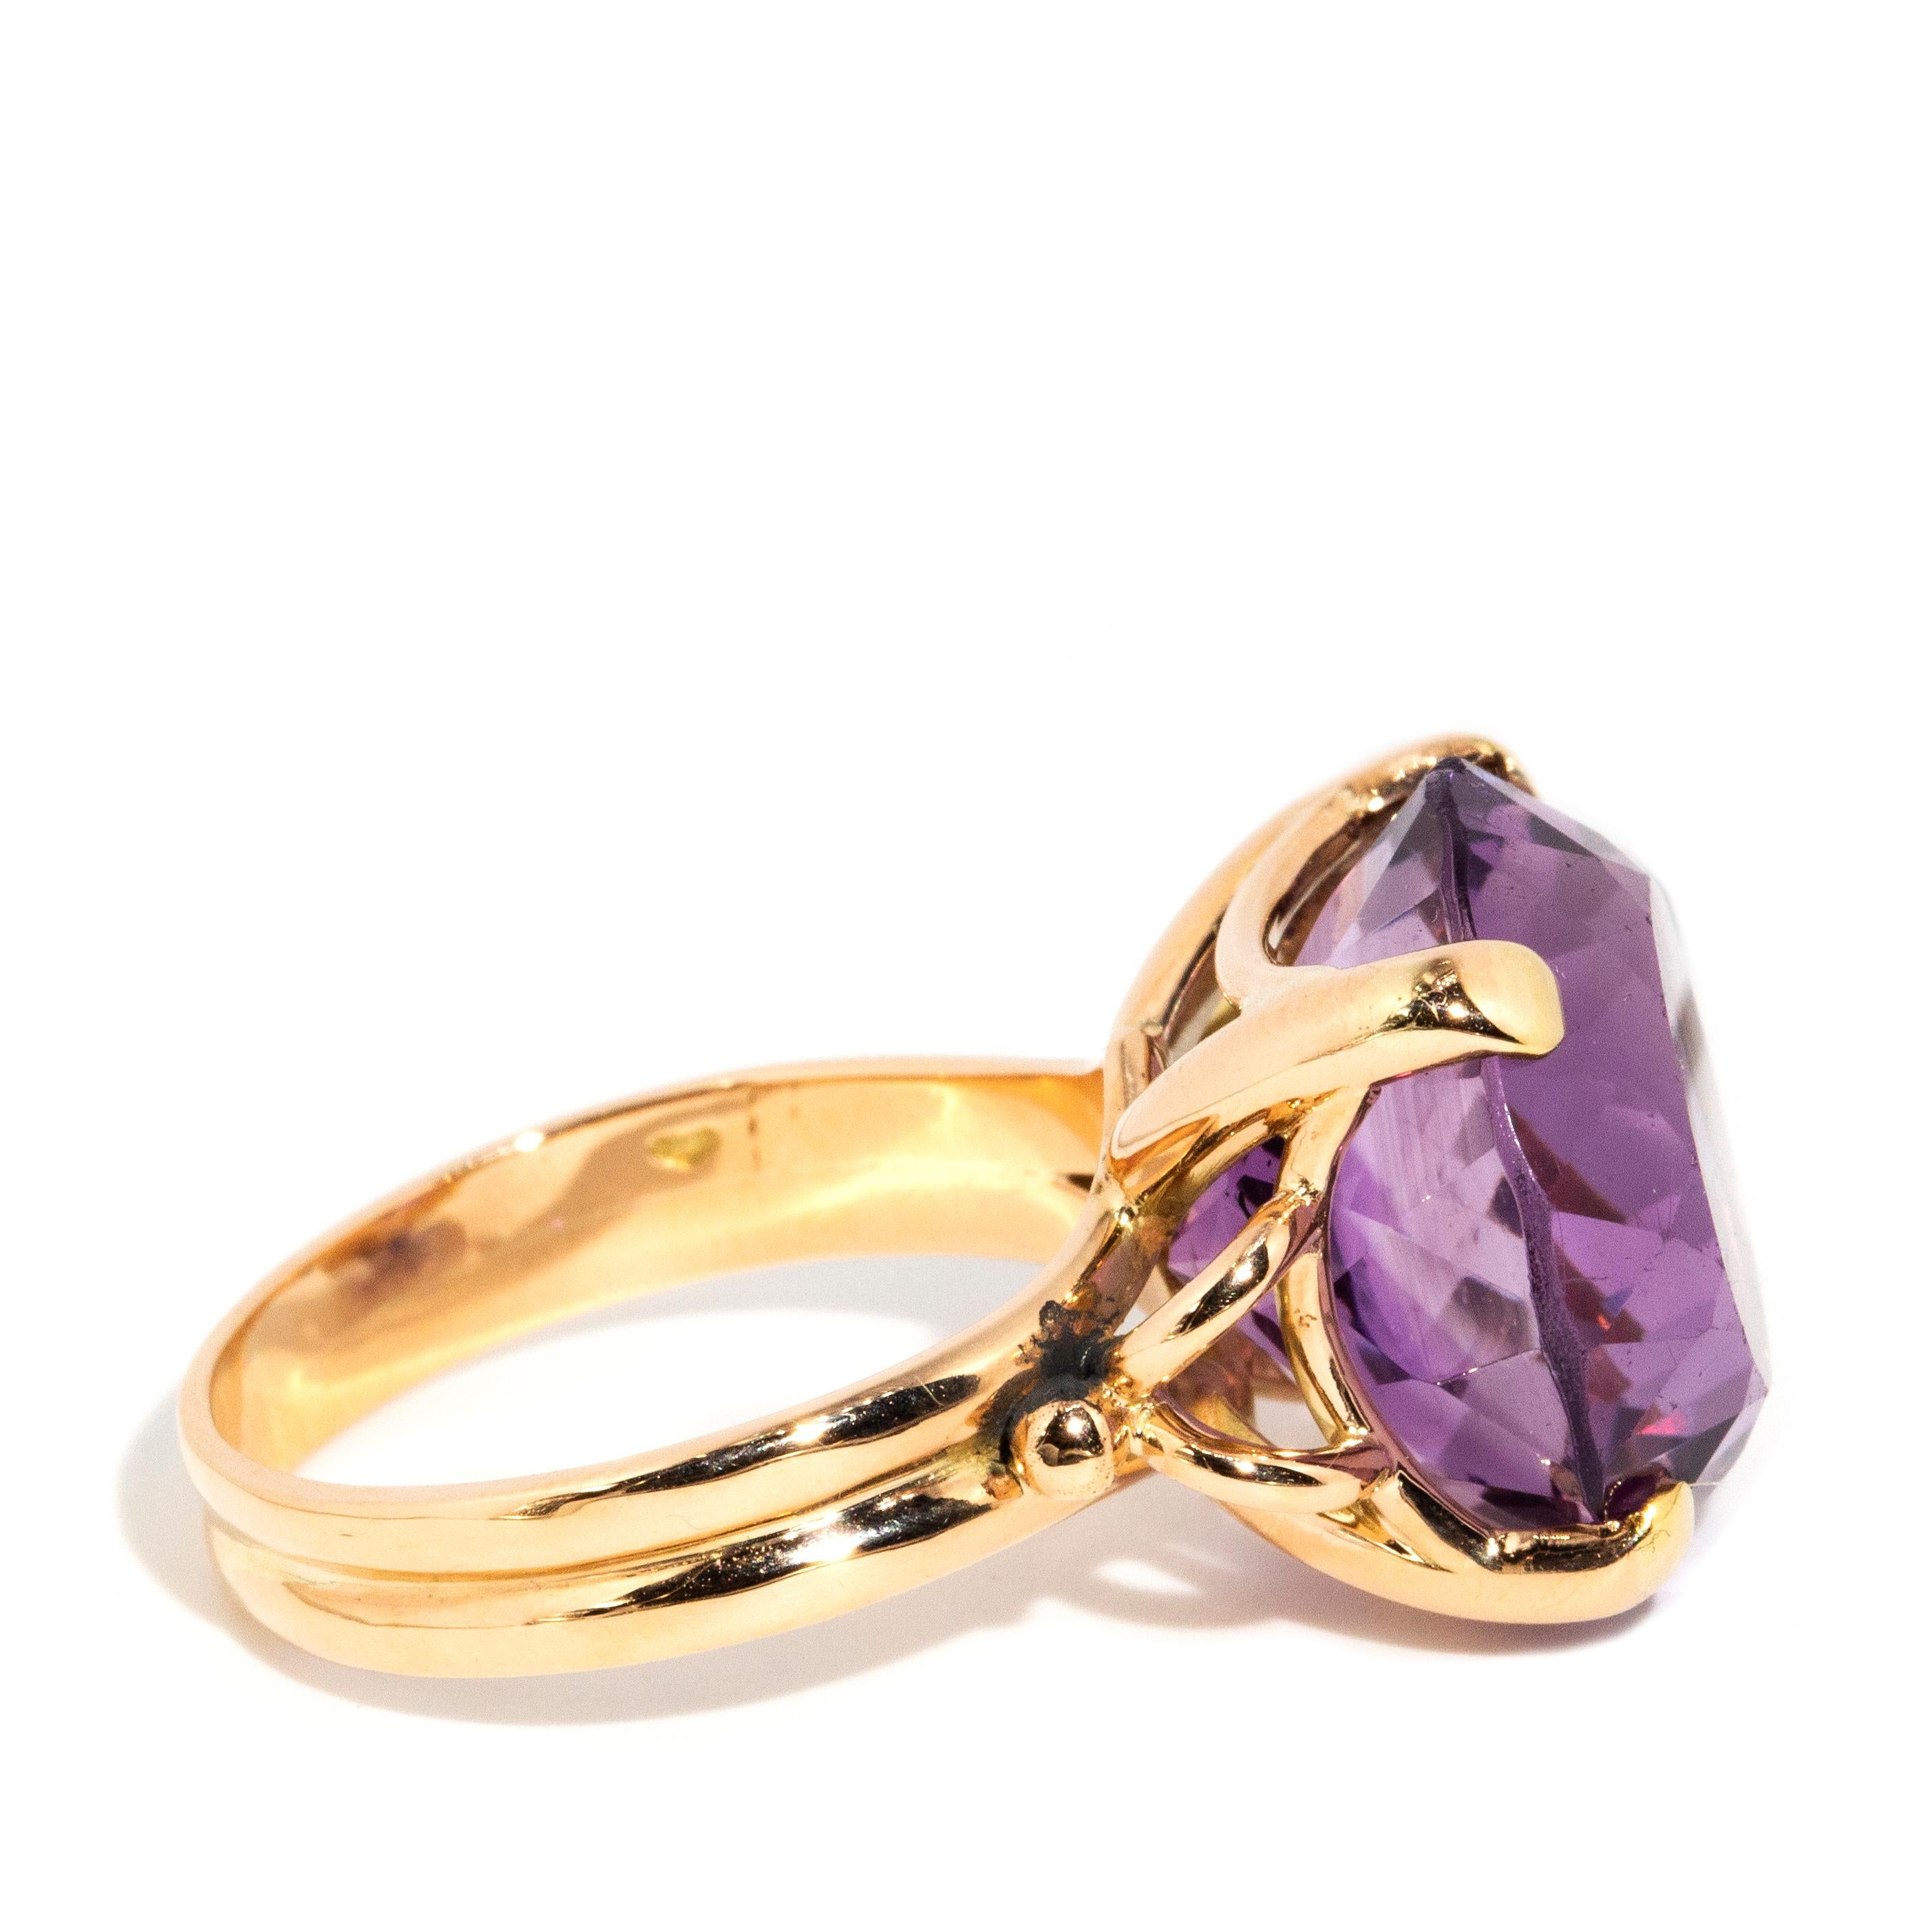 Women's Vintage Circa 1970s Round Amethyst Solitaire Cocktail Ring 14 Carat Yellow Gold